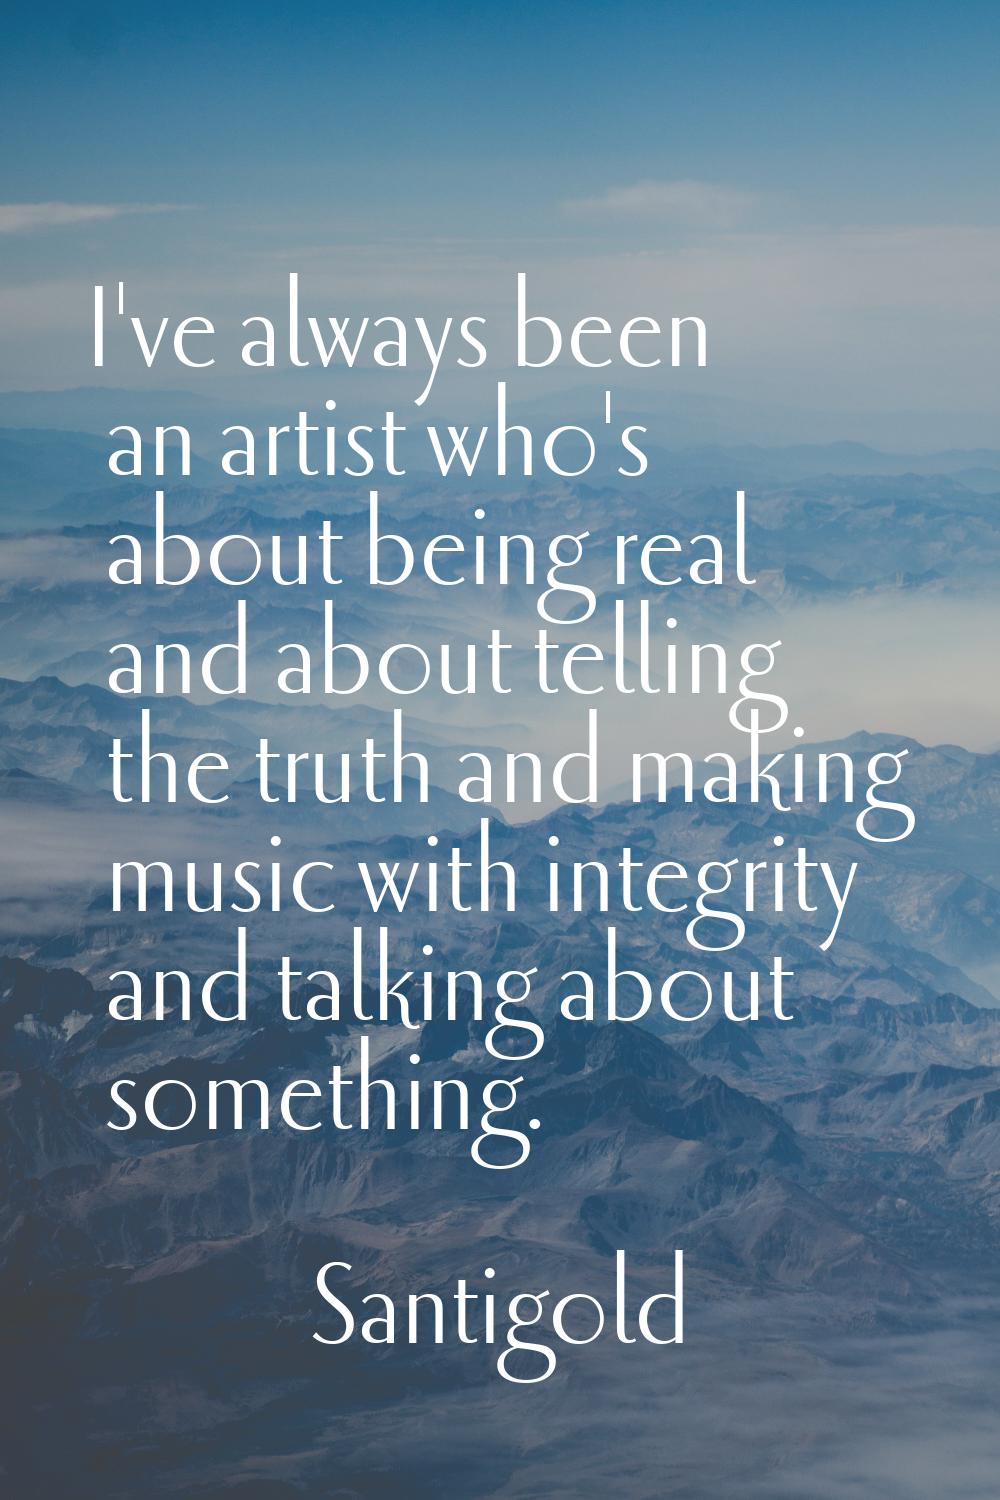 I've always been an artist who's about being real and about telling the truth and making music with